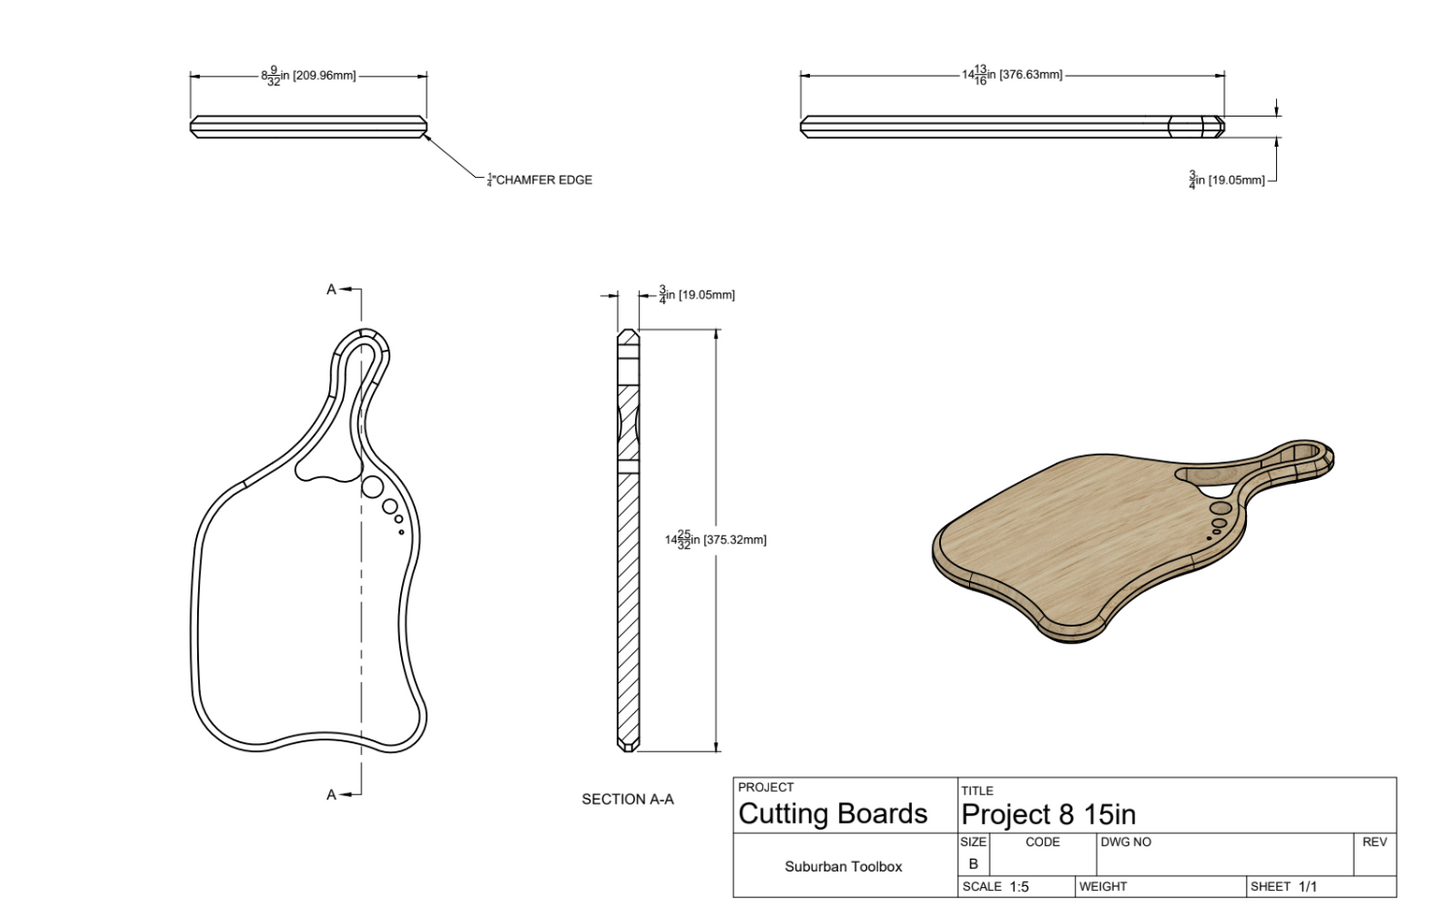 Get all the Charcuterie Board and Serving Tray Plans and save 75%. 20 Plans in total